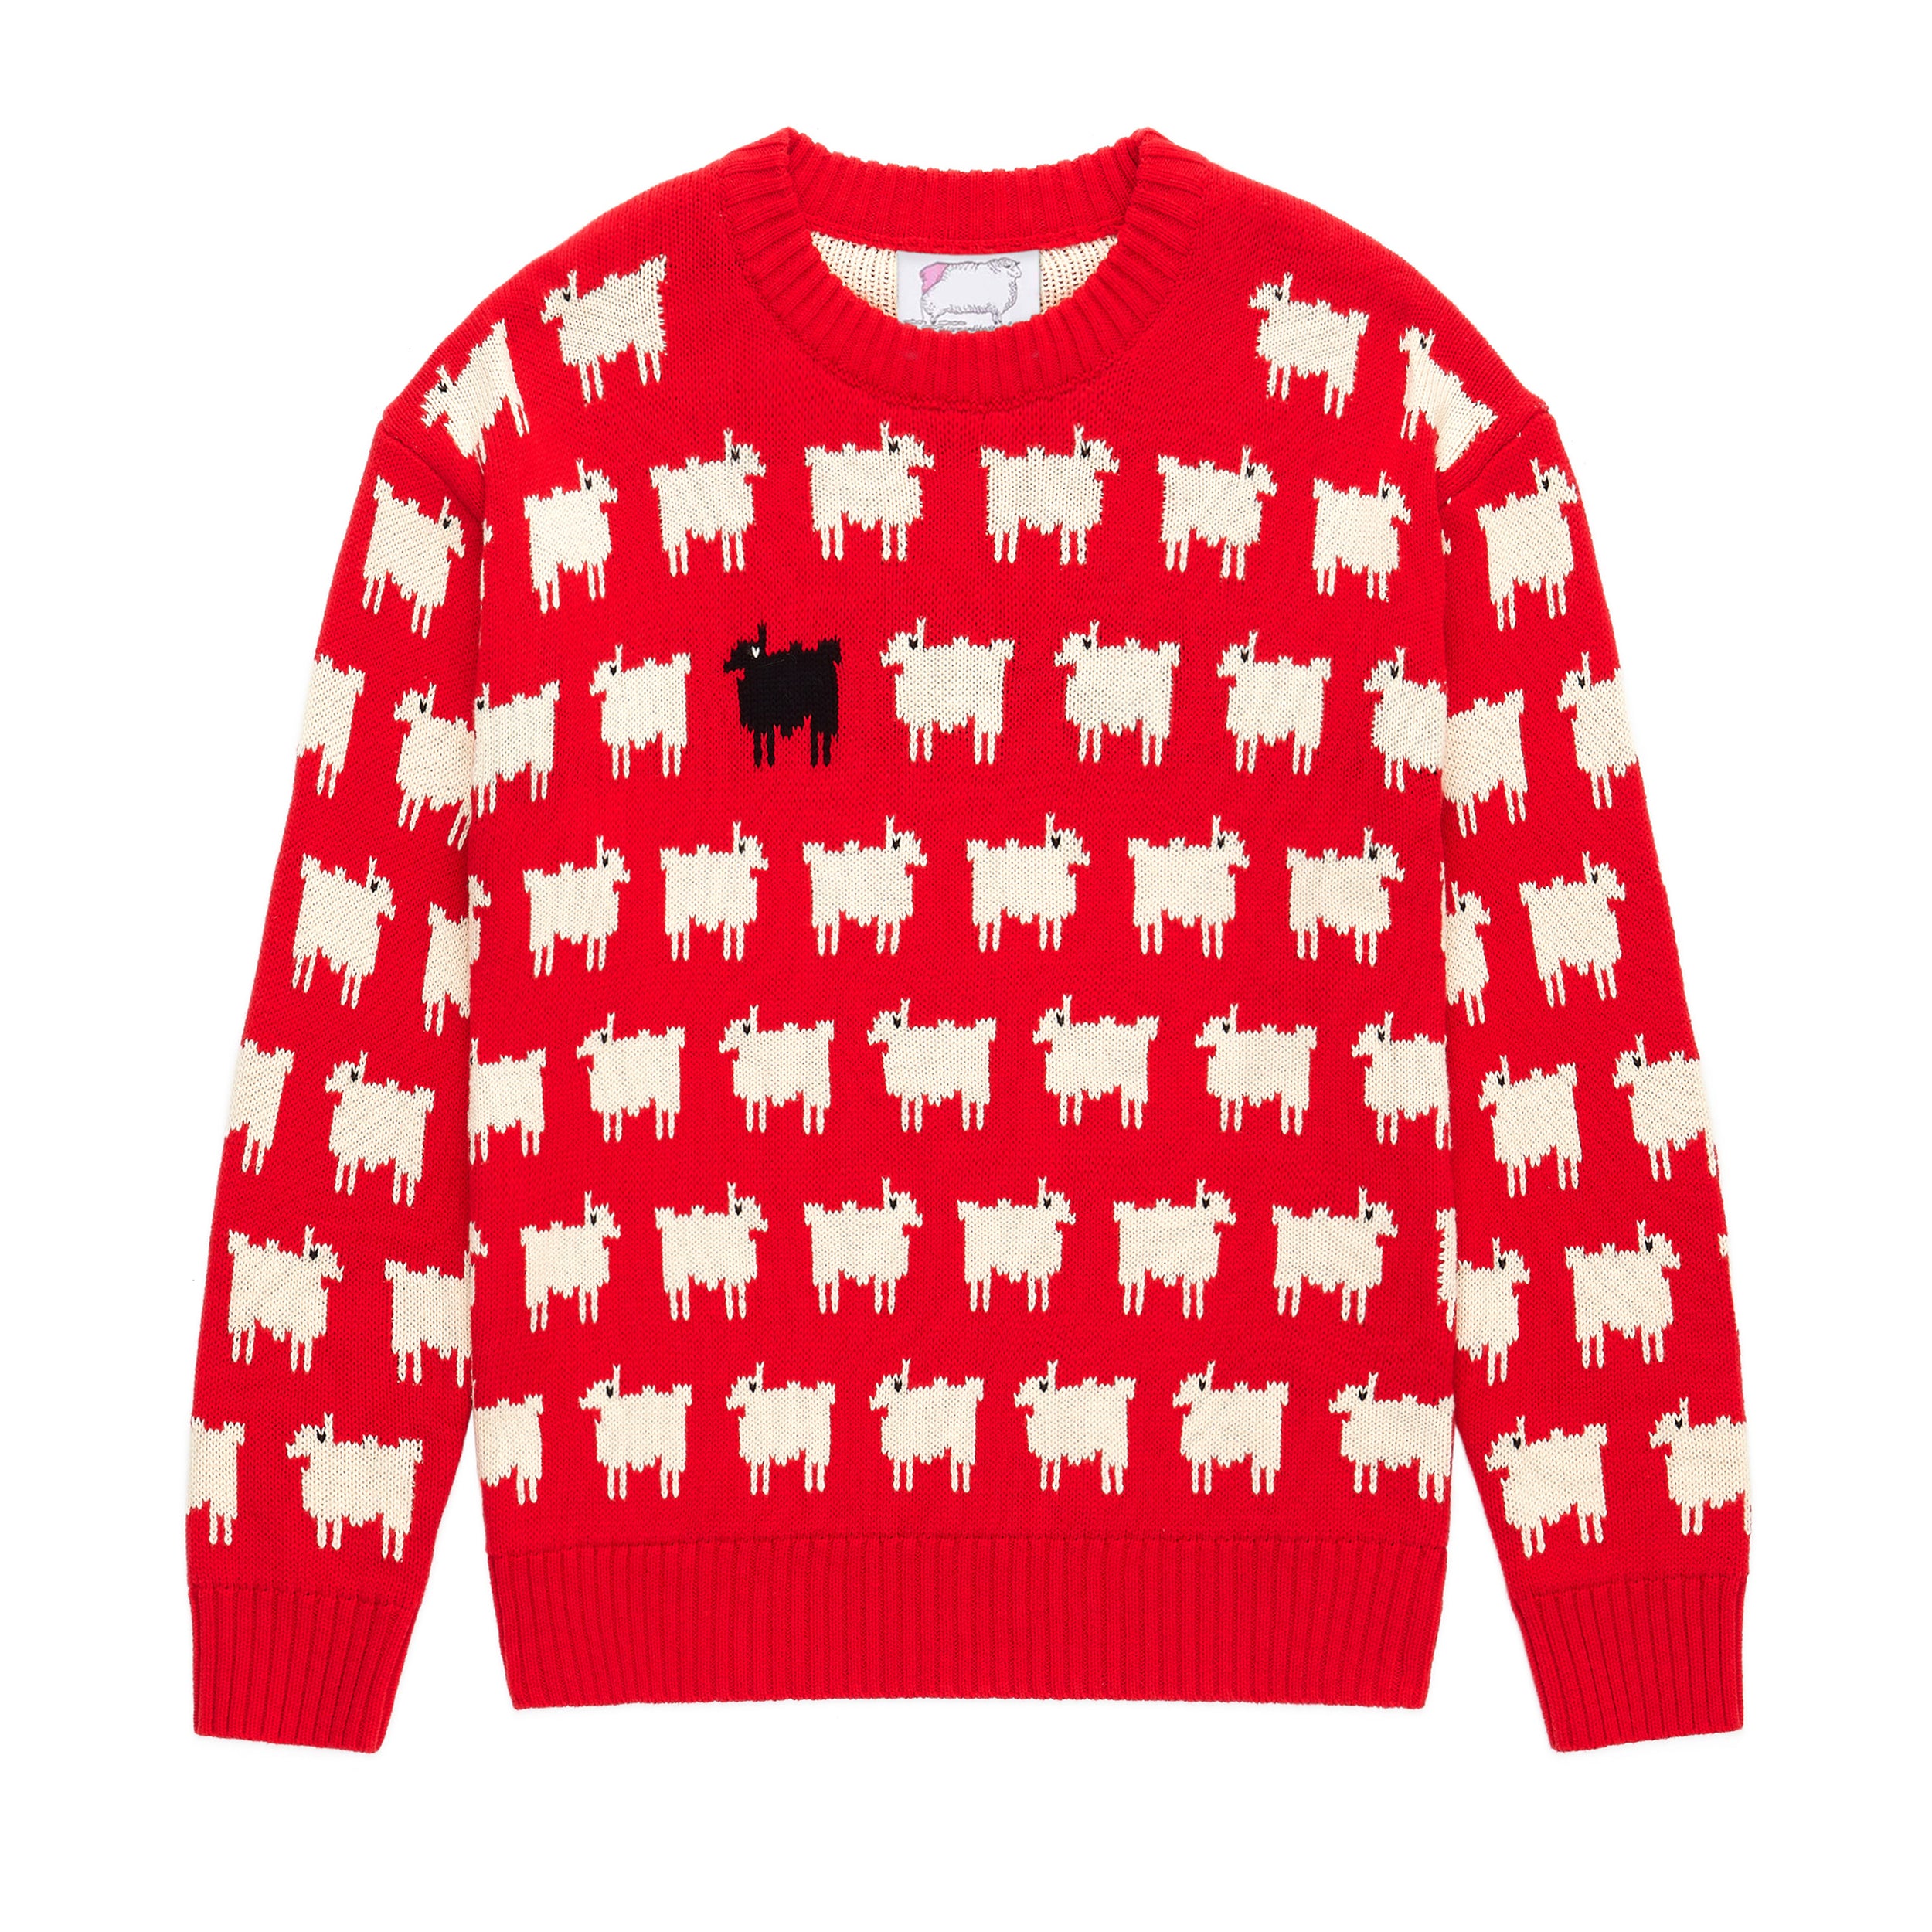 Warm & Wonderful Women's Fitted "Diana Edition" Cotton Sheep Sweater